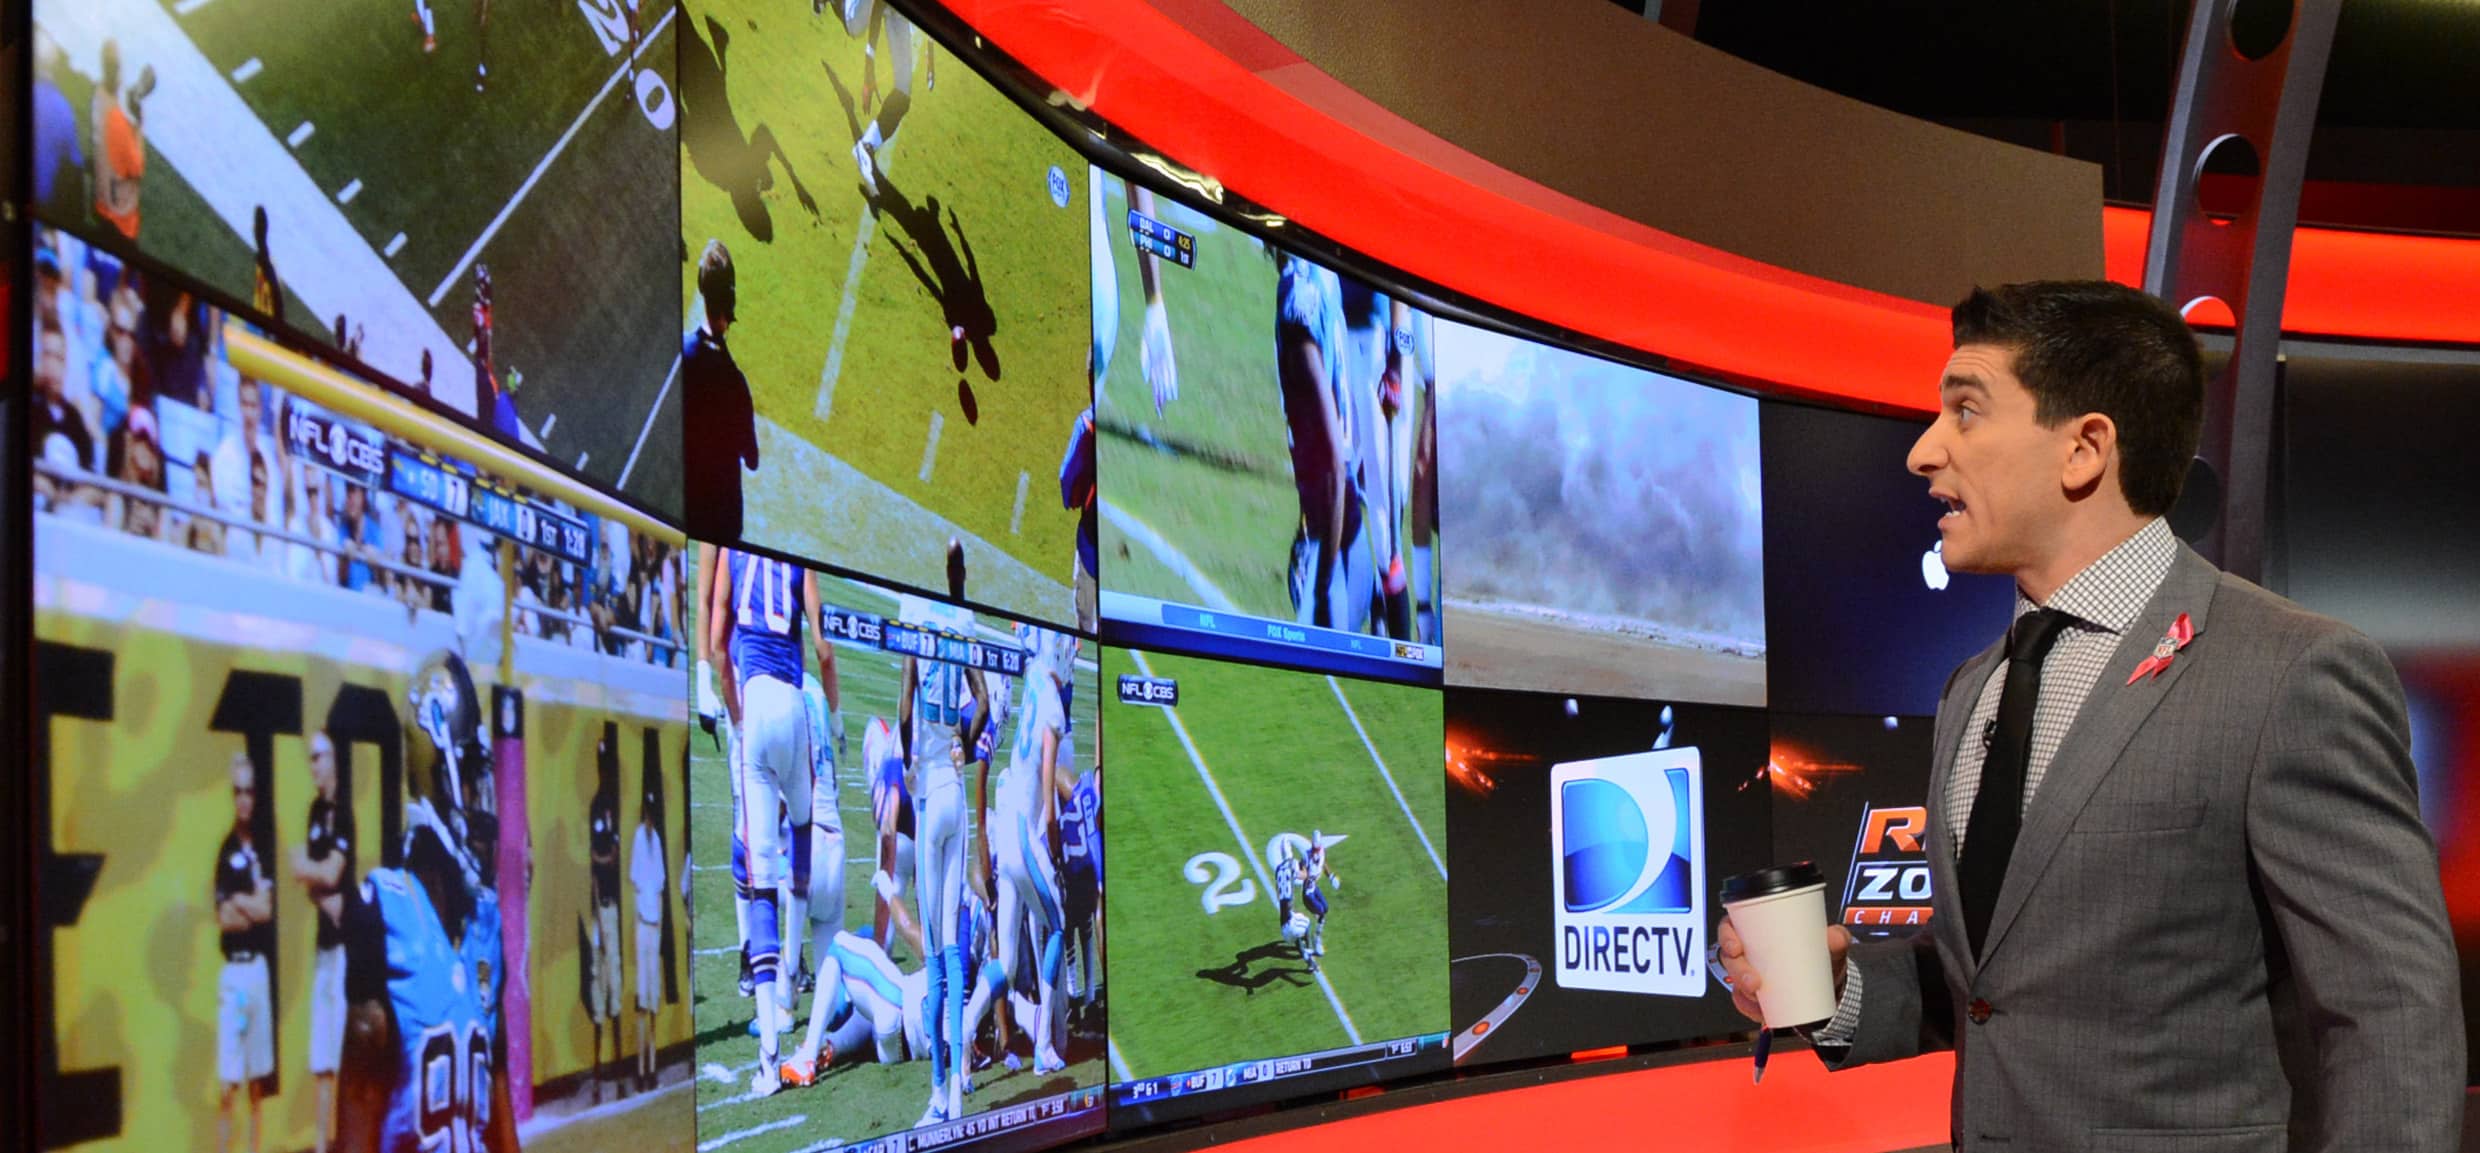 DirecTVs Red Zone Channel Going Away Next Season